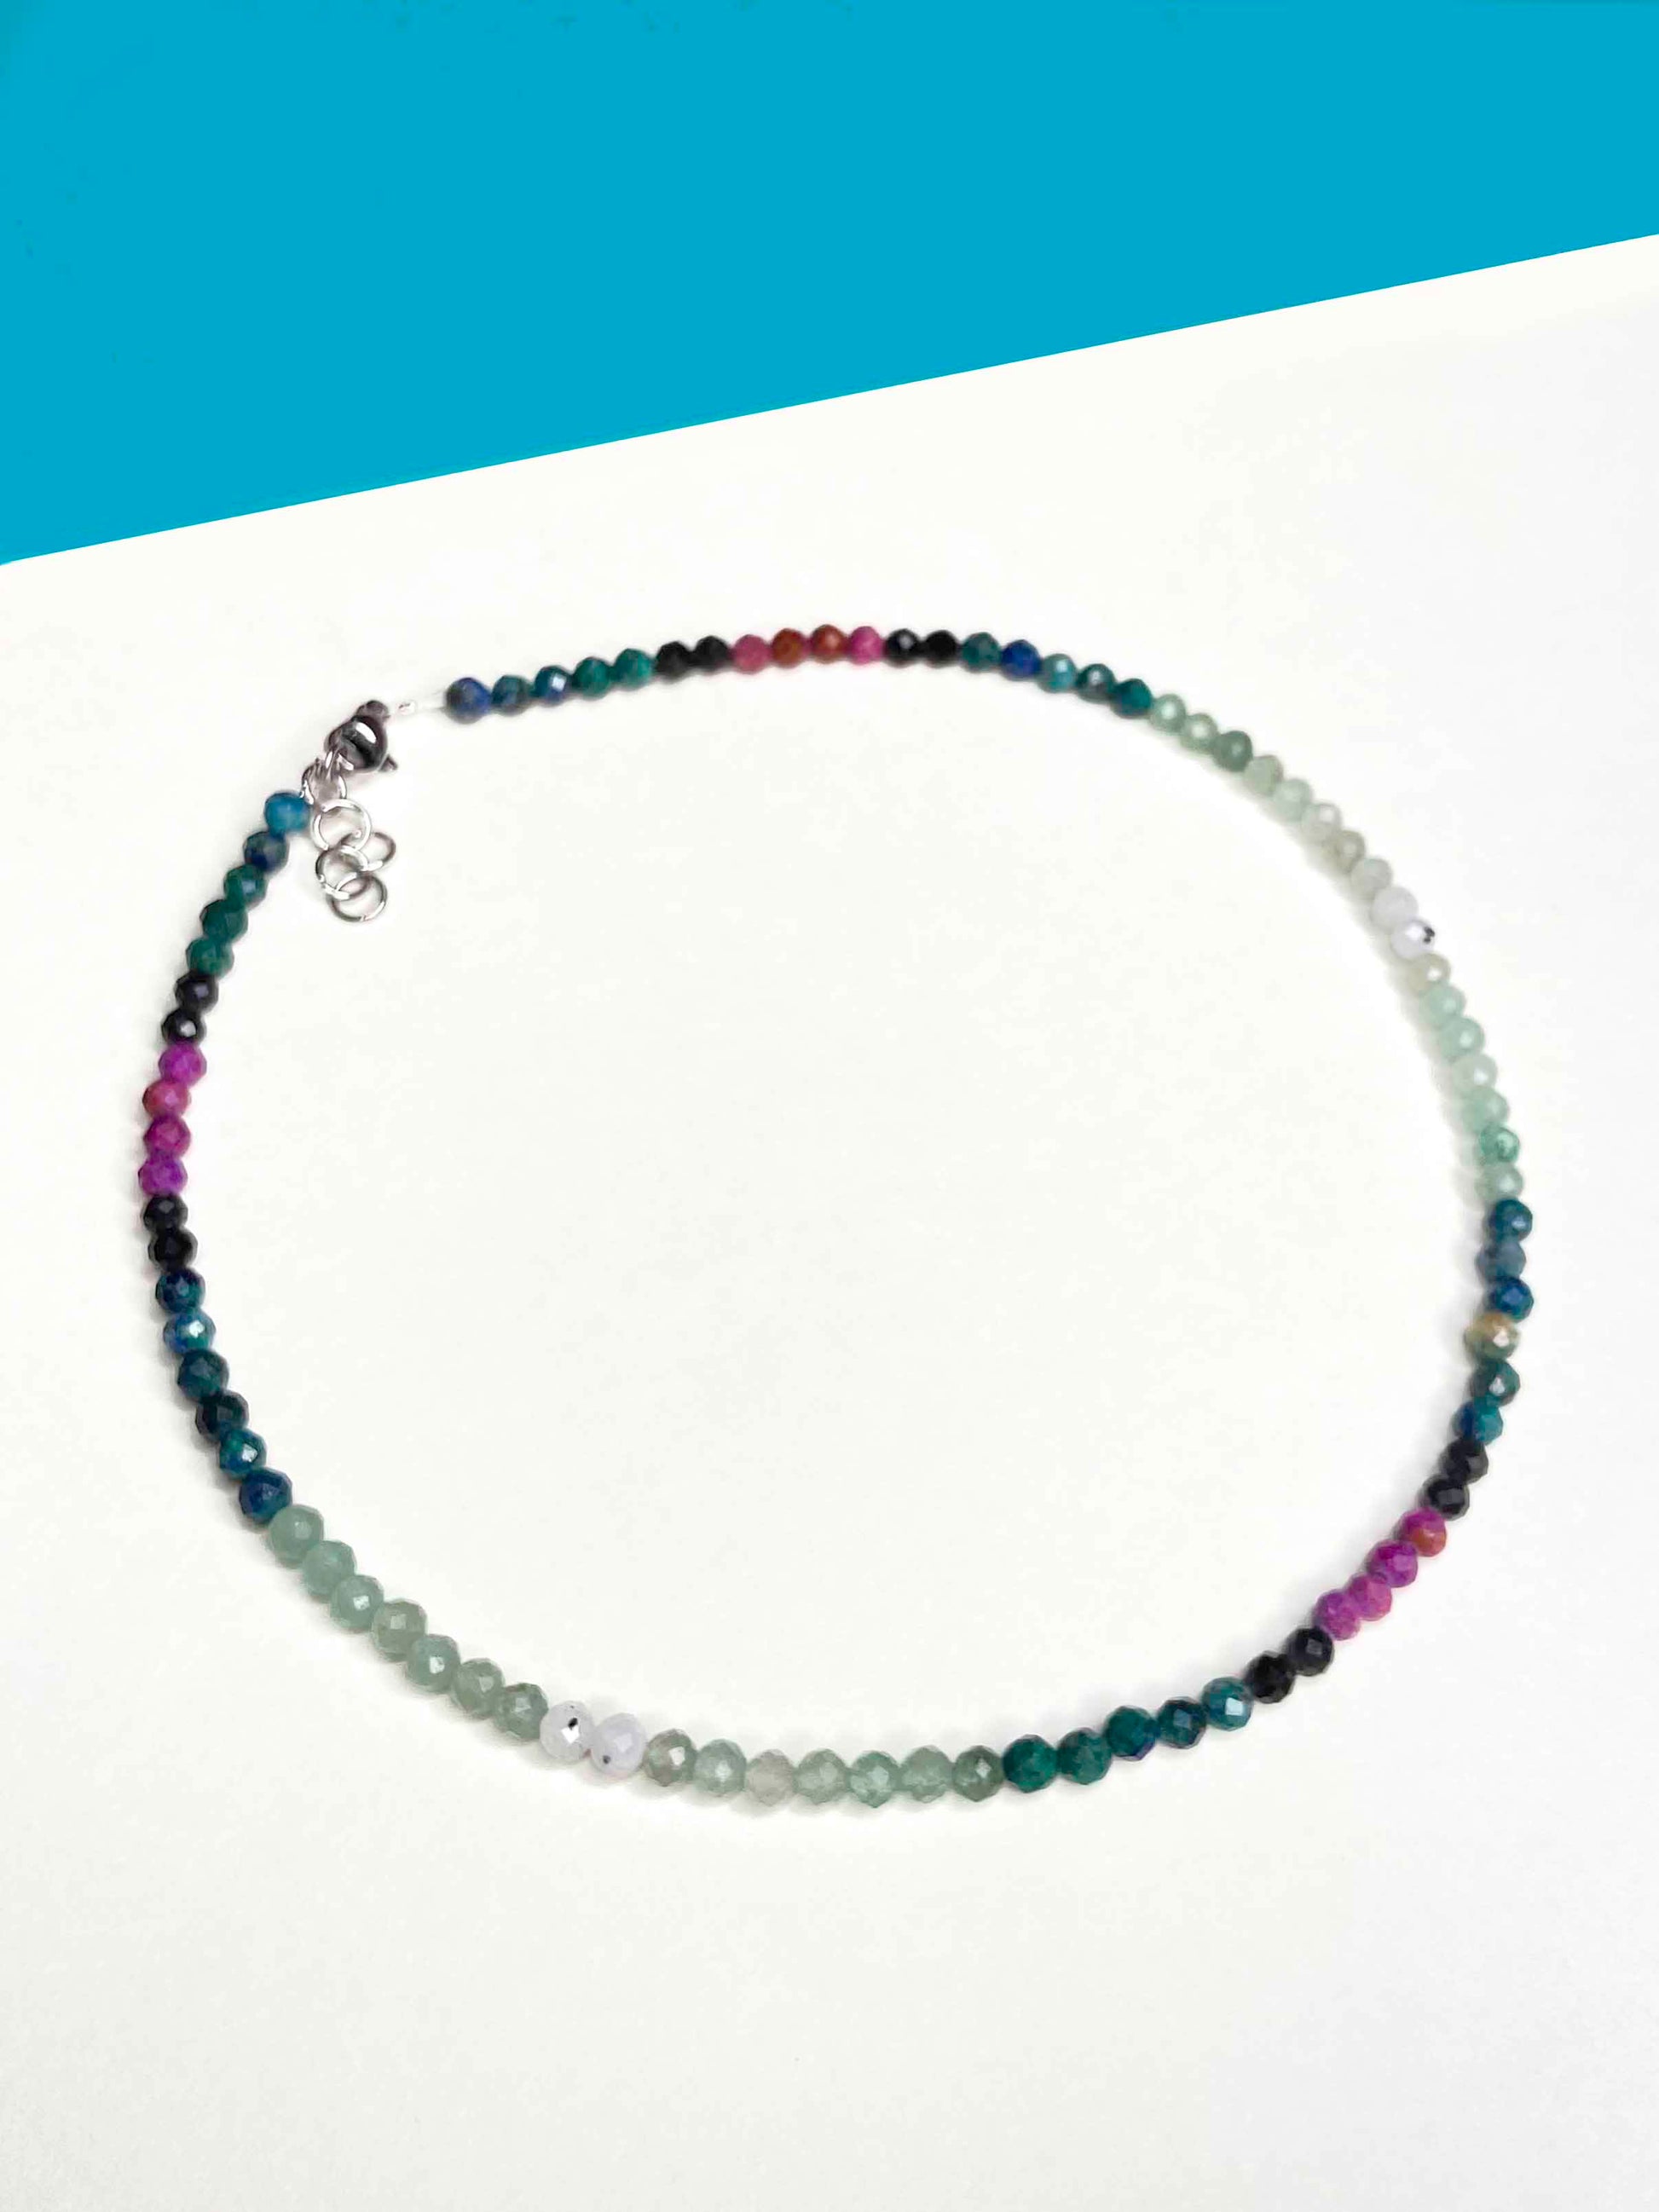 Handmade beaded green and purple mixed gemstone necklace with a sterling silver clasp.